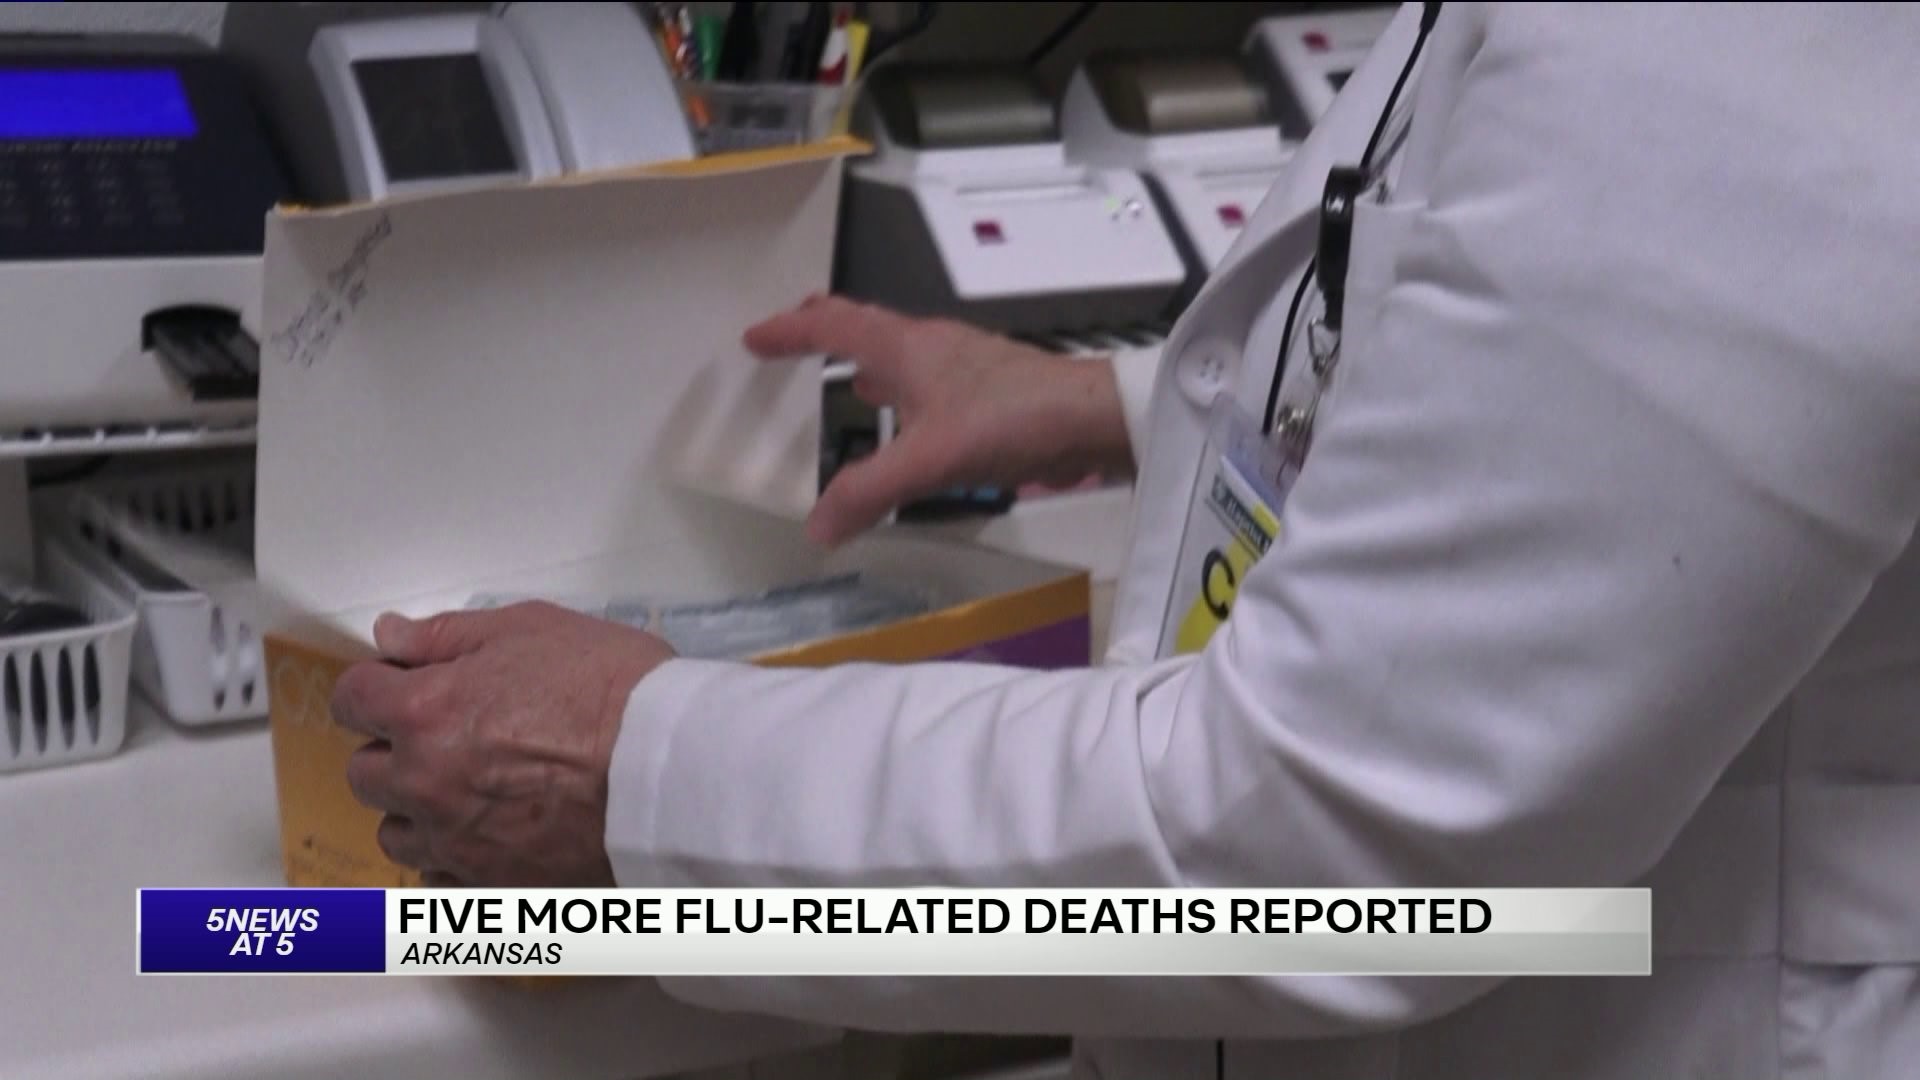 Five More Die From Flu-Related Illnesses In Arkansas, Totaling 13 This Flu Season